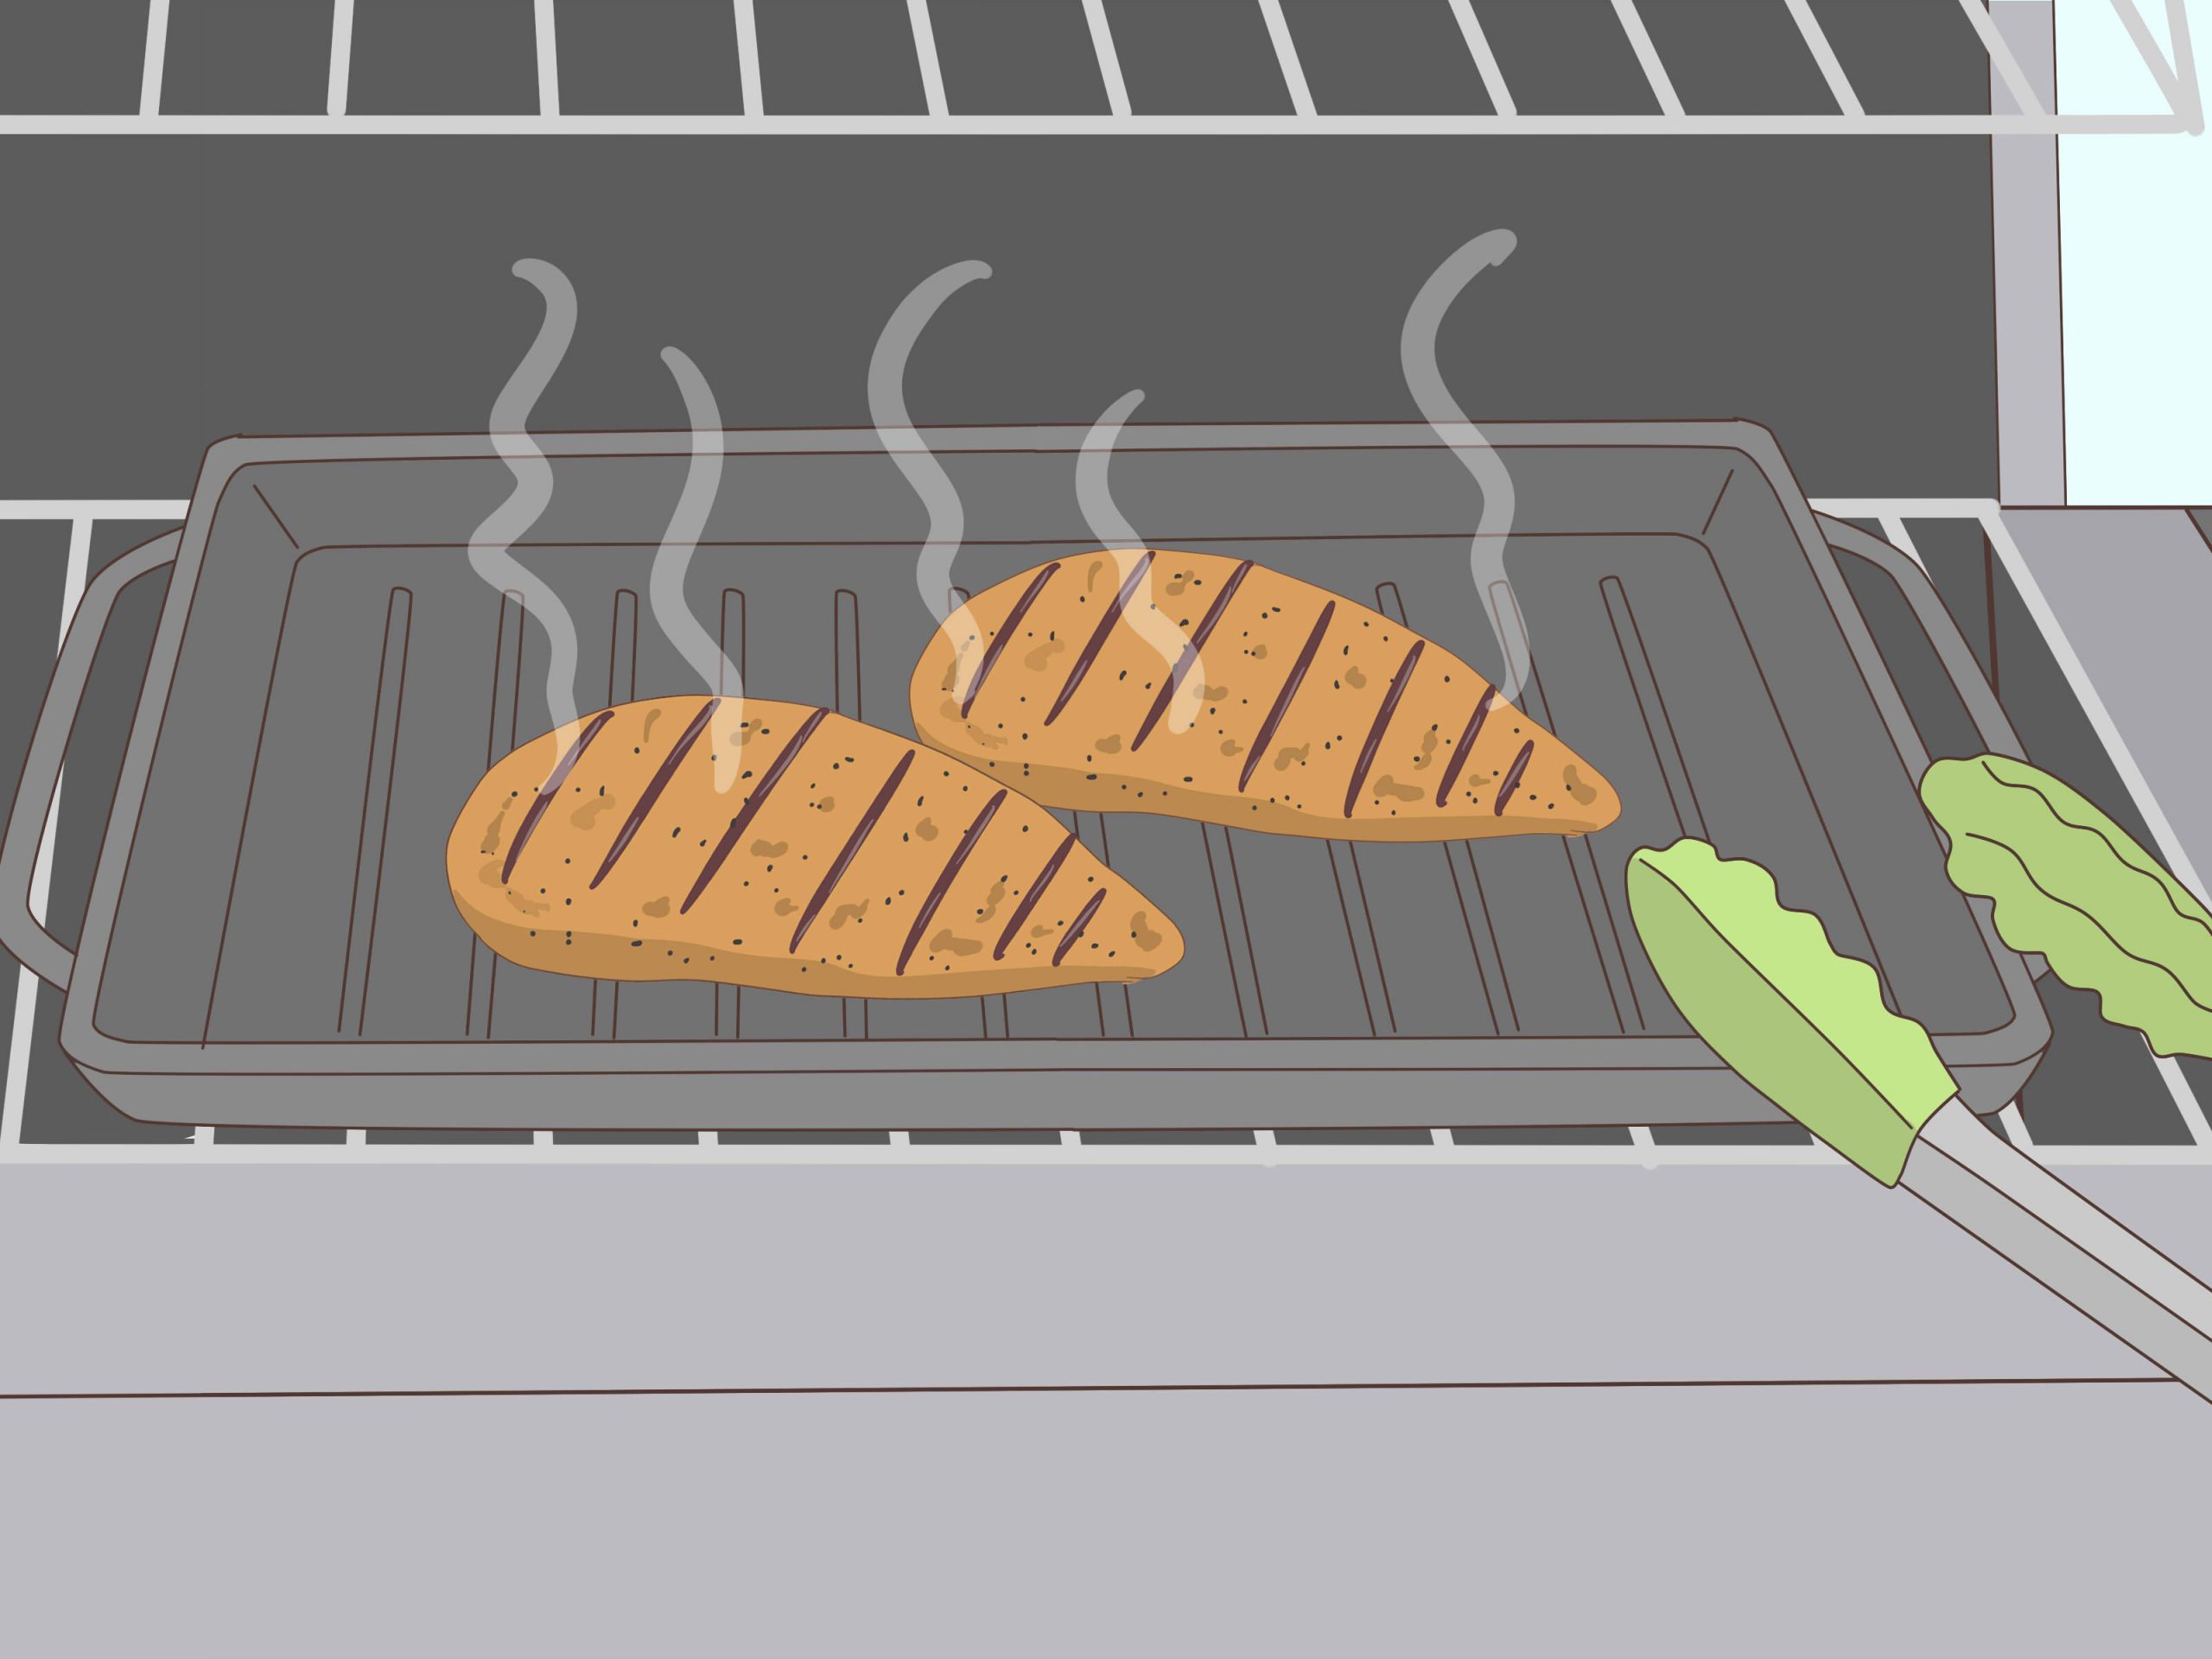 Defrost Chicken Breasts In Microwave
 3 Ways to Defrost Chicken Breast wikiHow